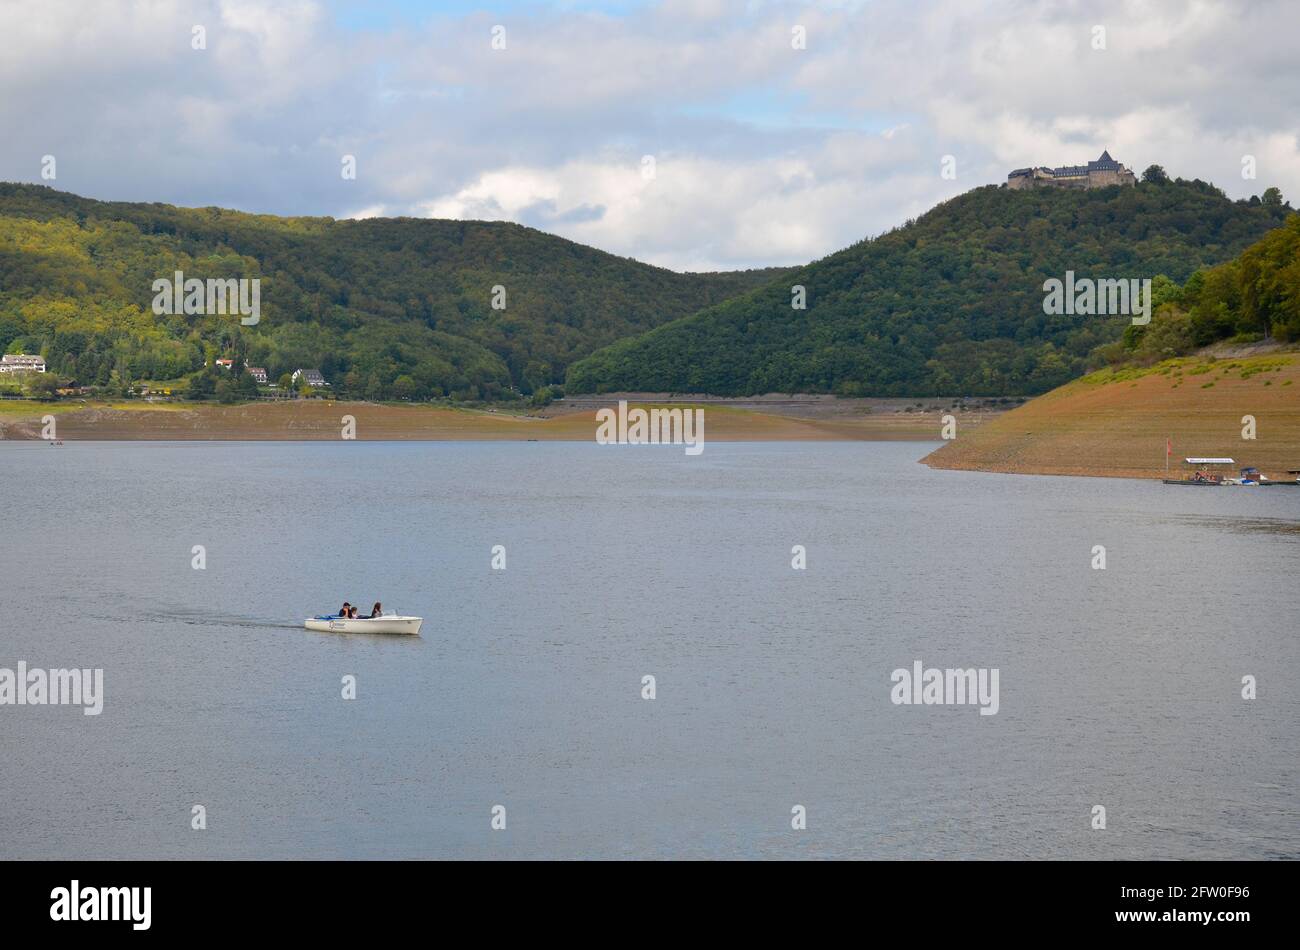 Edersee, Hessen, Germany - September 10 2011: View of the Edersee with the Waldeck fortress and mountains in the background and a small boat Stock Photo